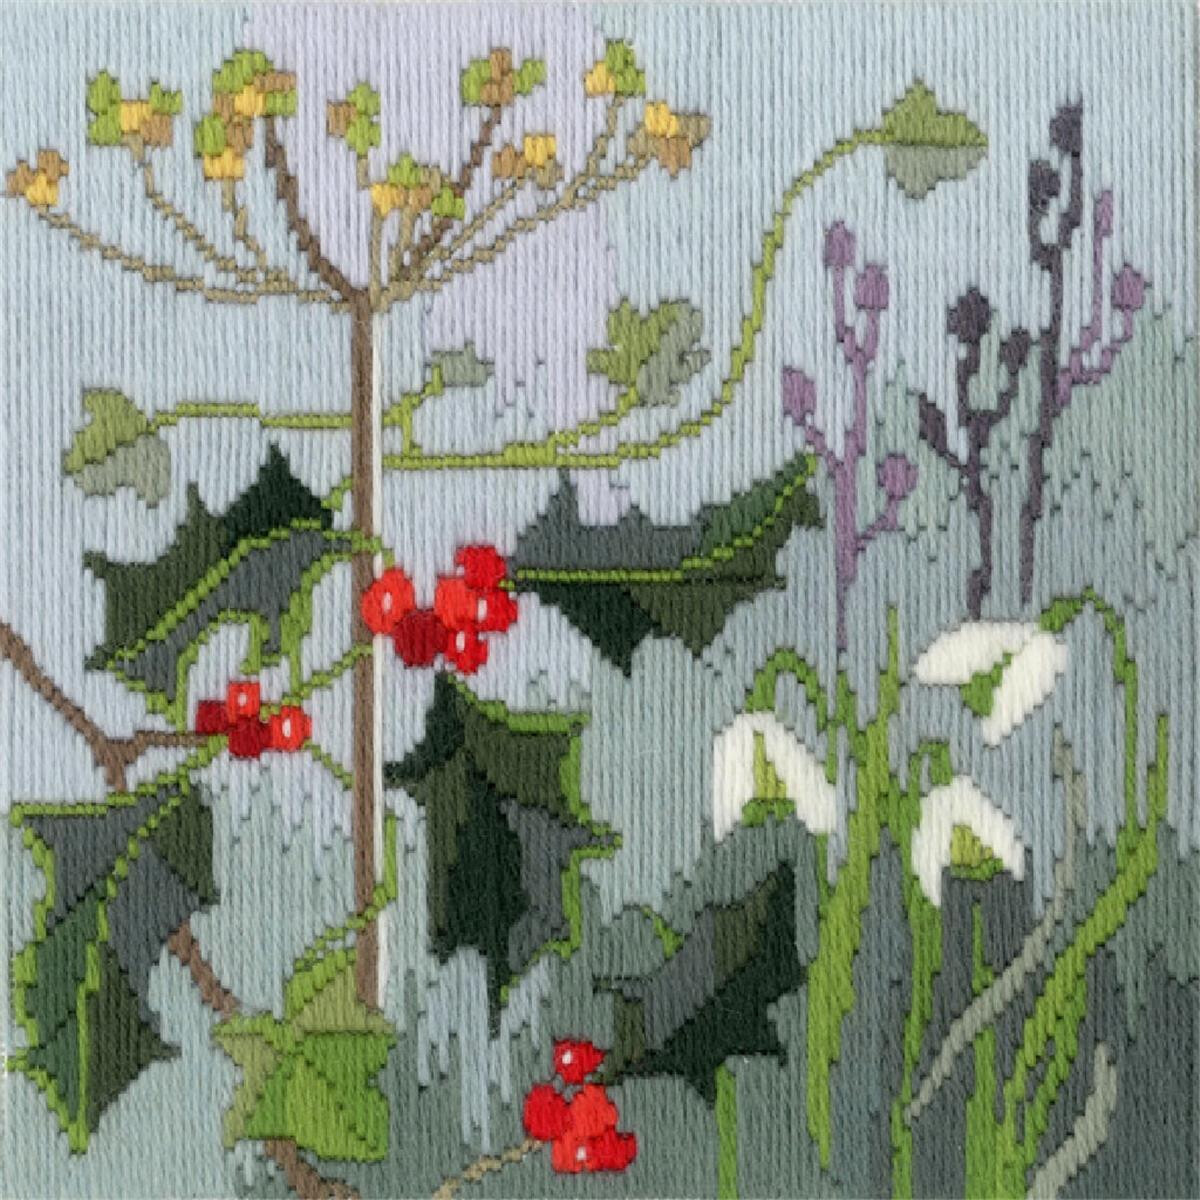 An embroidered embroidery pack from Bothy Threads shows a...